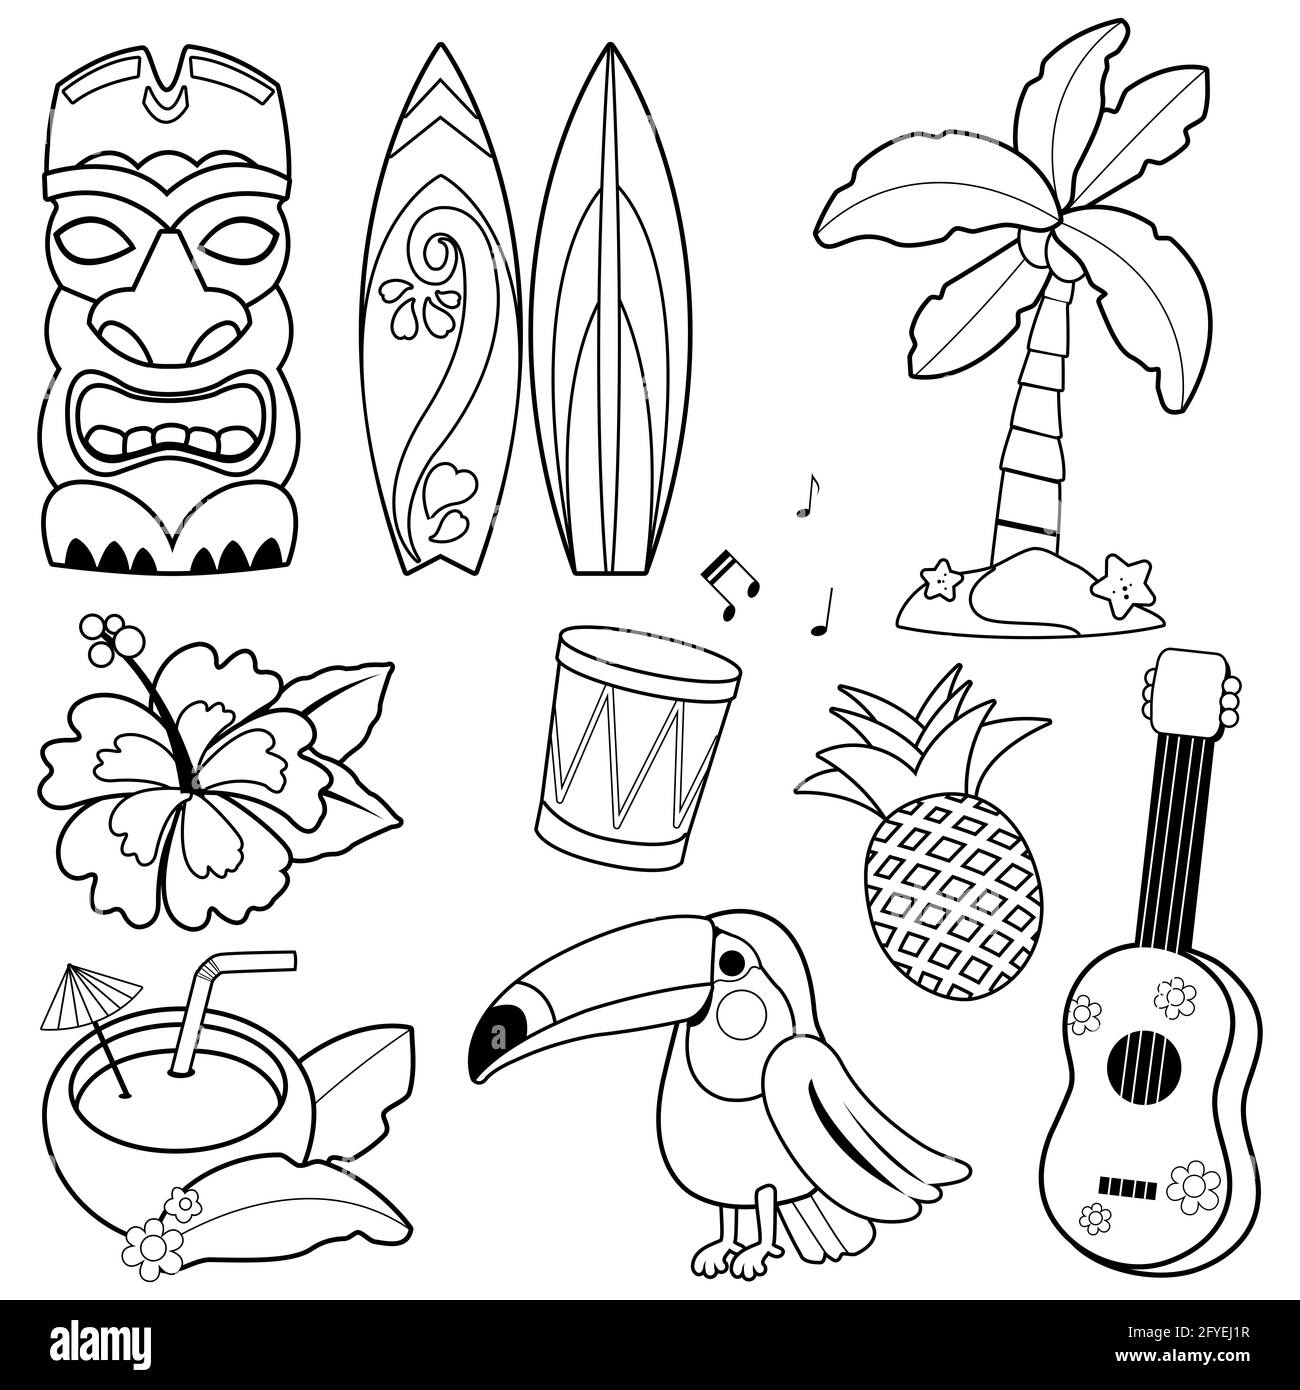 Hawaiian collection of objects including a toucan bird, tiki mask and other summer vacation design elements. Black and white coloring page. Stock Photo